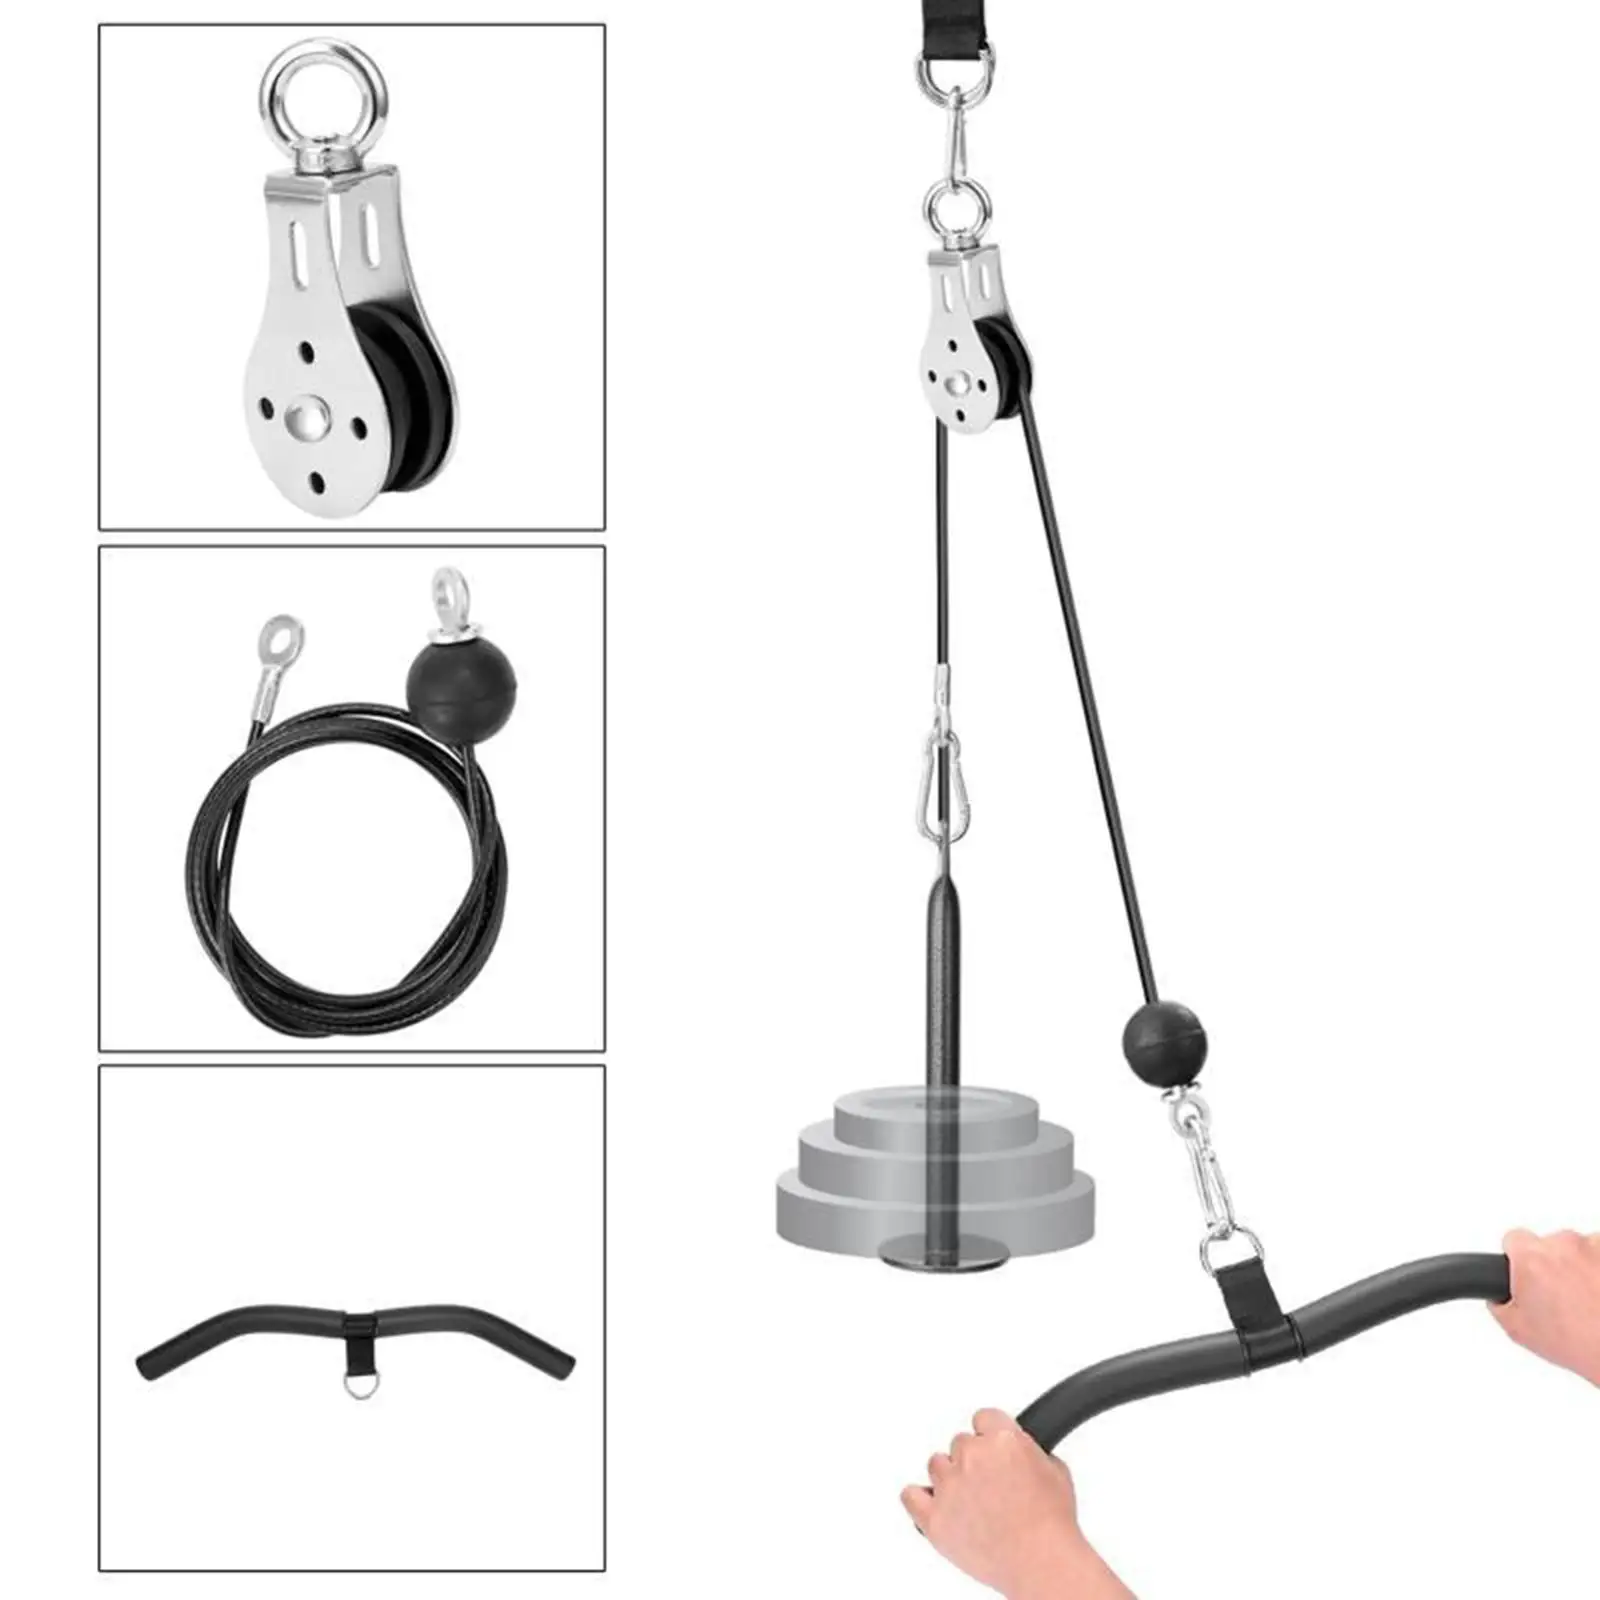  Pulley Cable Pulley System Pull Down Machine Attachment  Exercise Equipment for Biceps Curl Bodybuilding Shoulder 